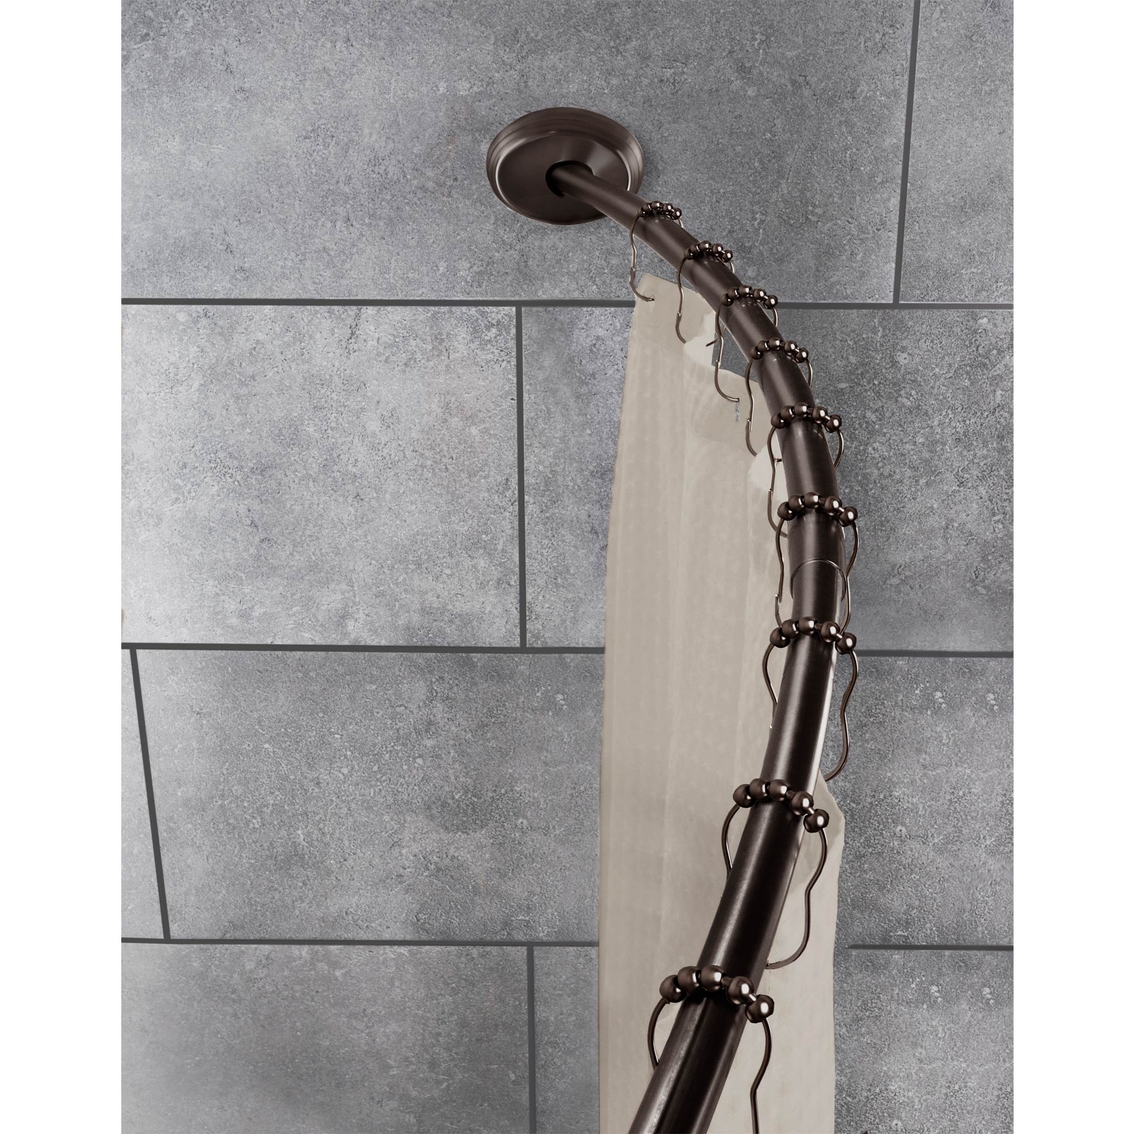 Maytex Smart Rods Curved Tension Shower Rod, Oil Rubbed Bronze - Image 2 of 2